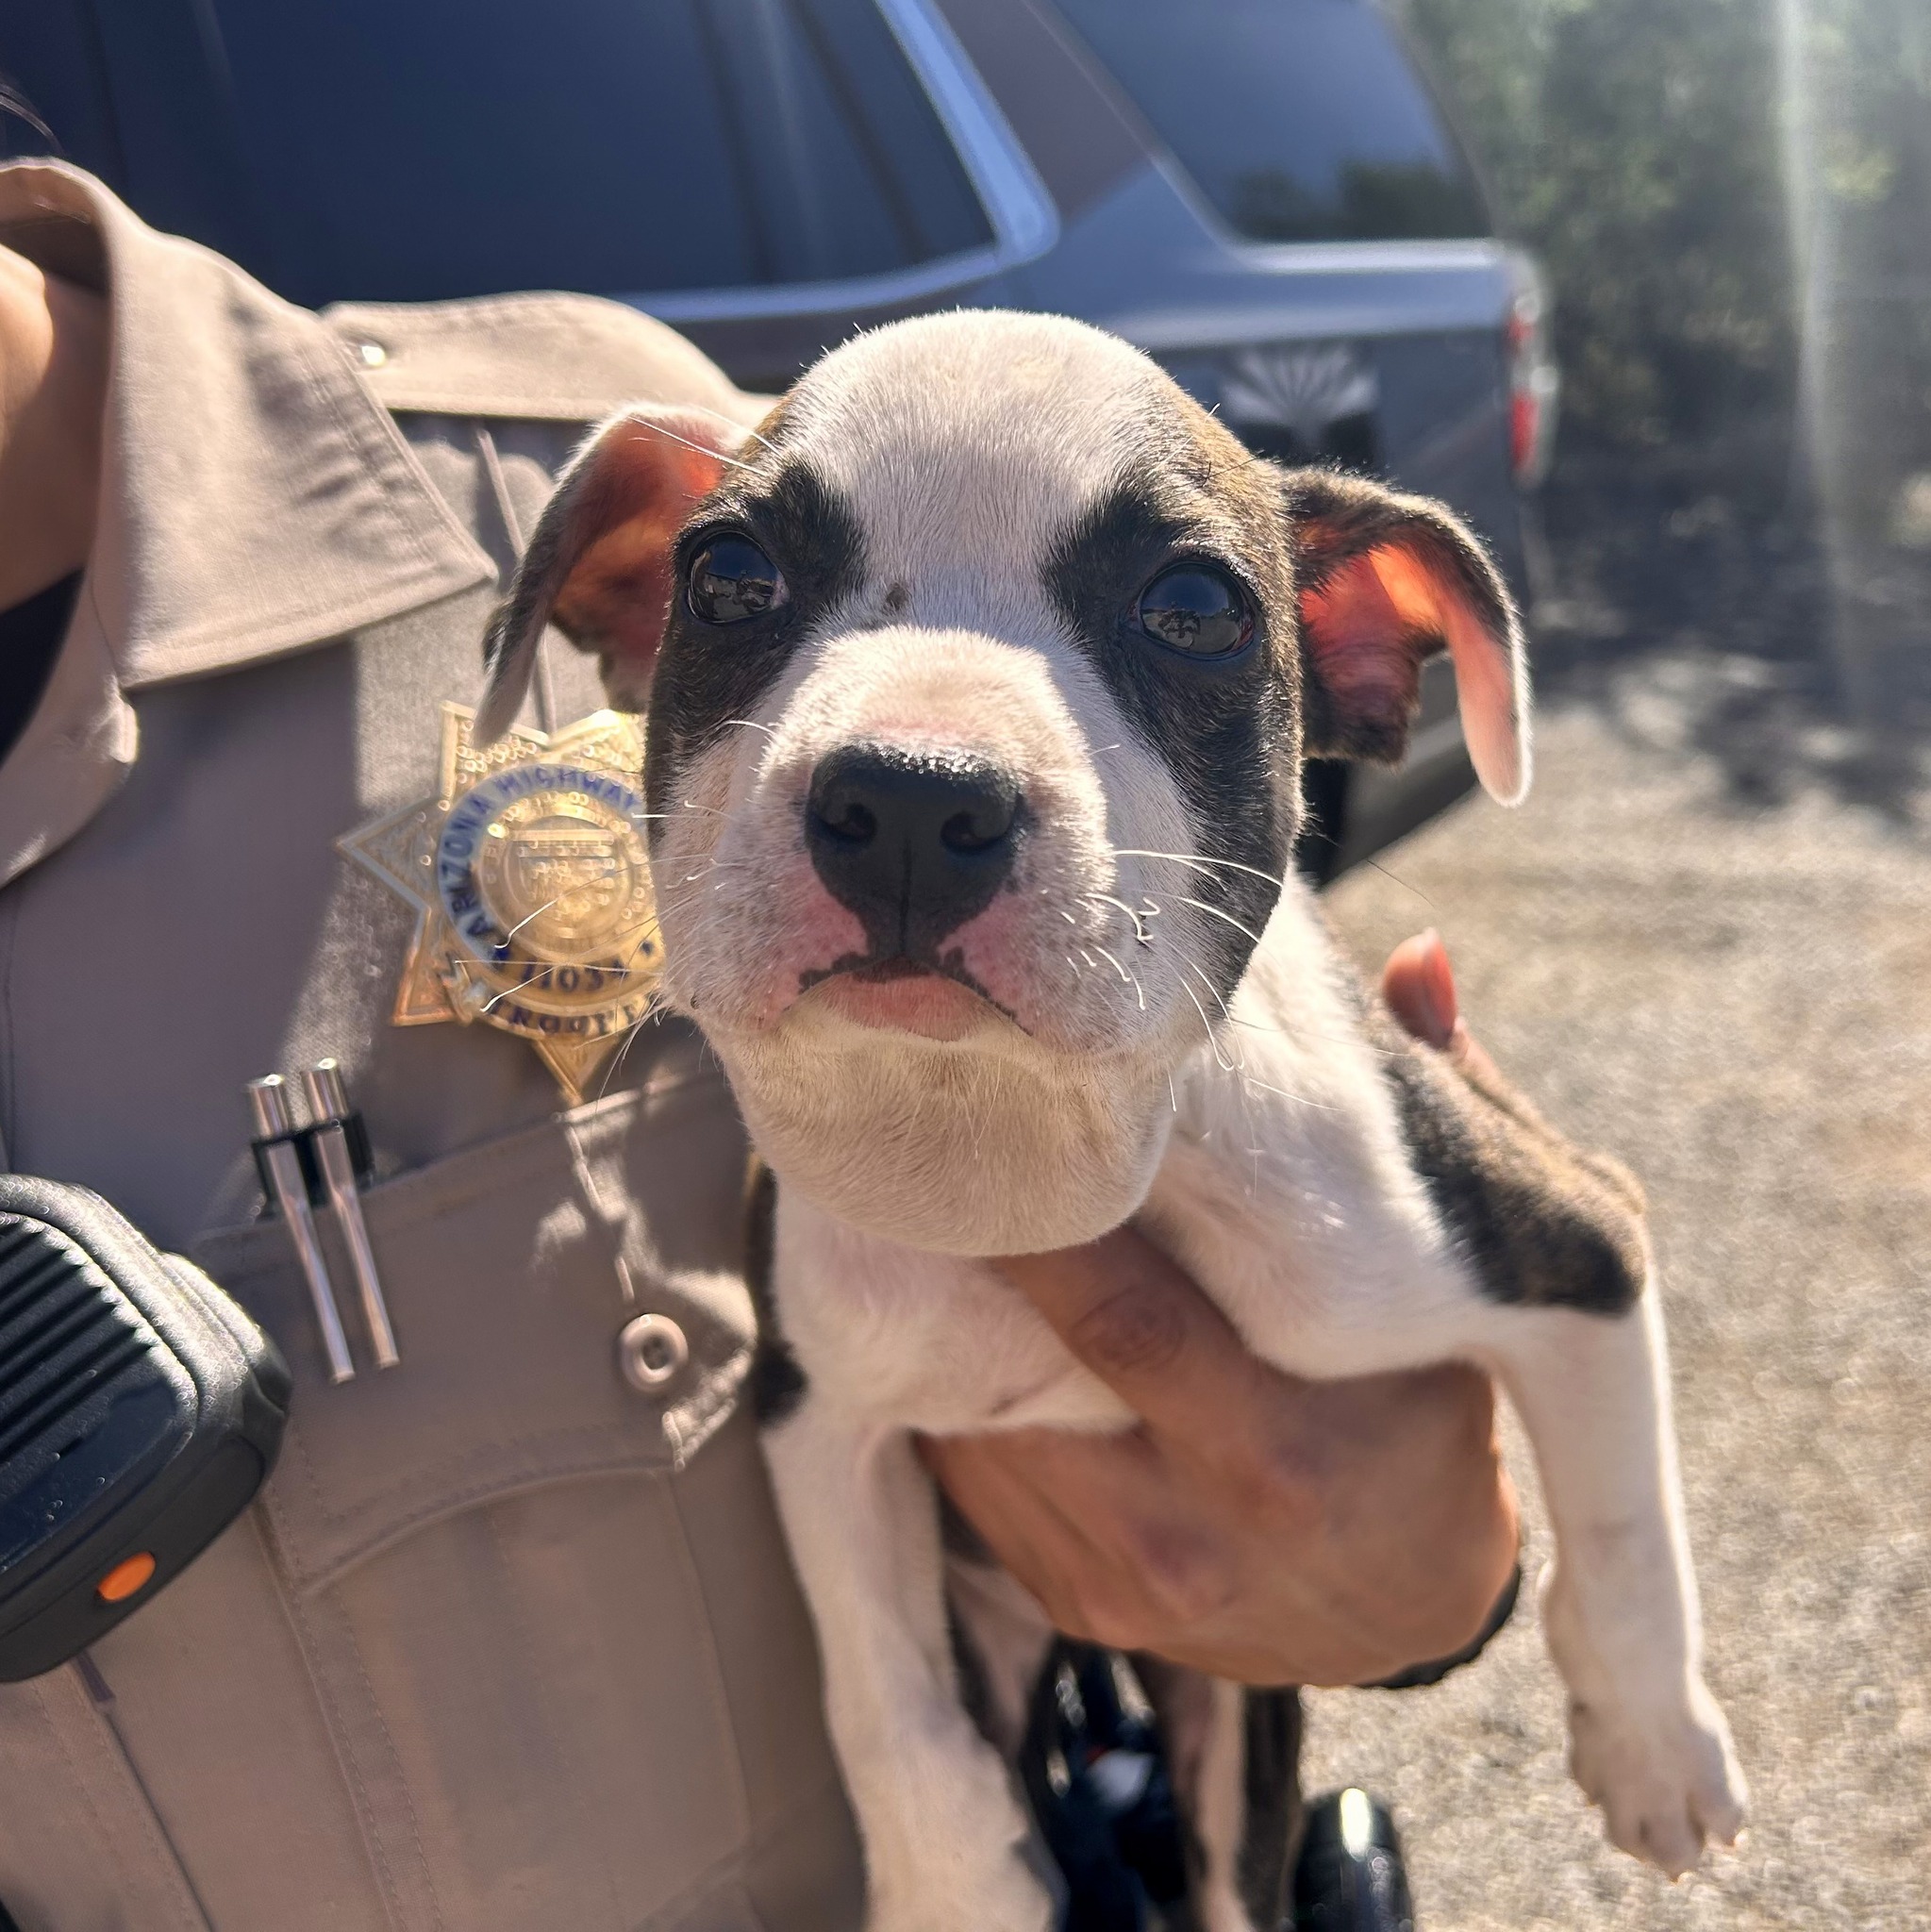 police officer holding a puppy